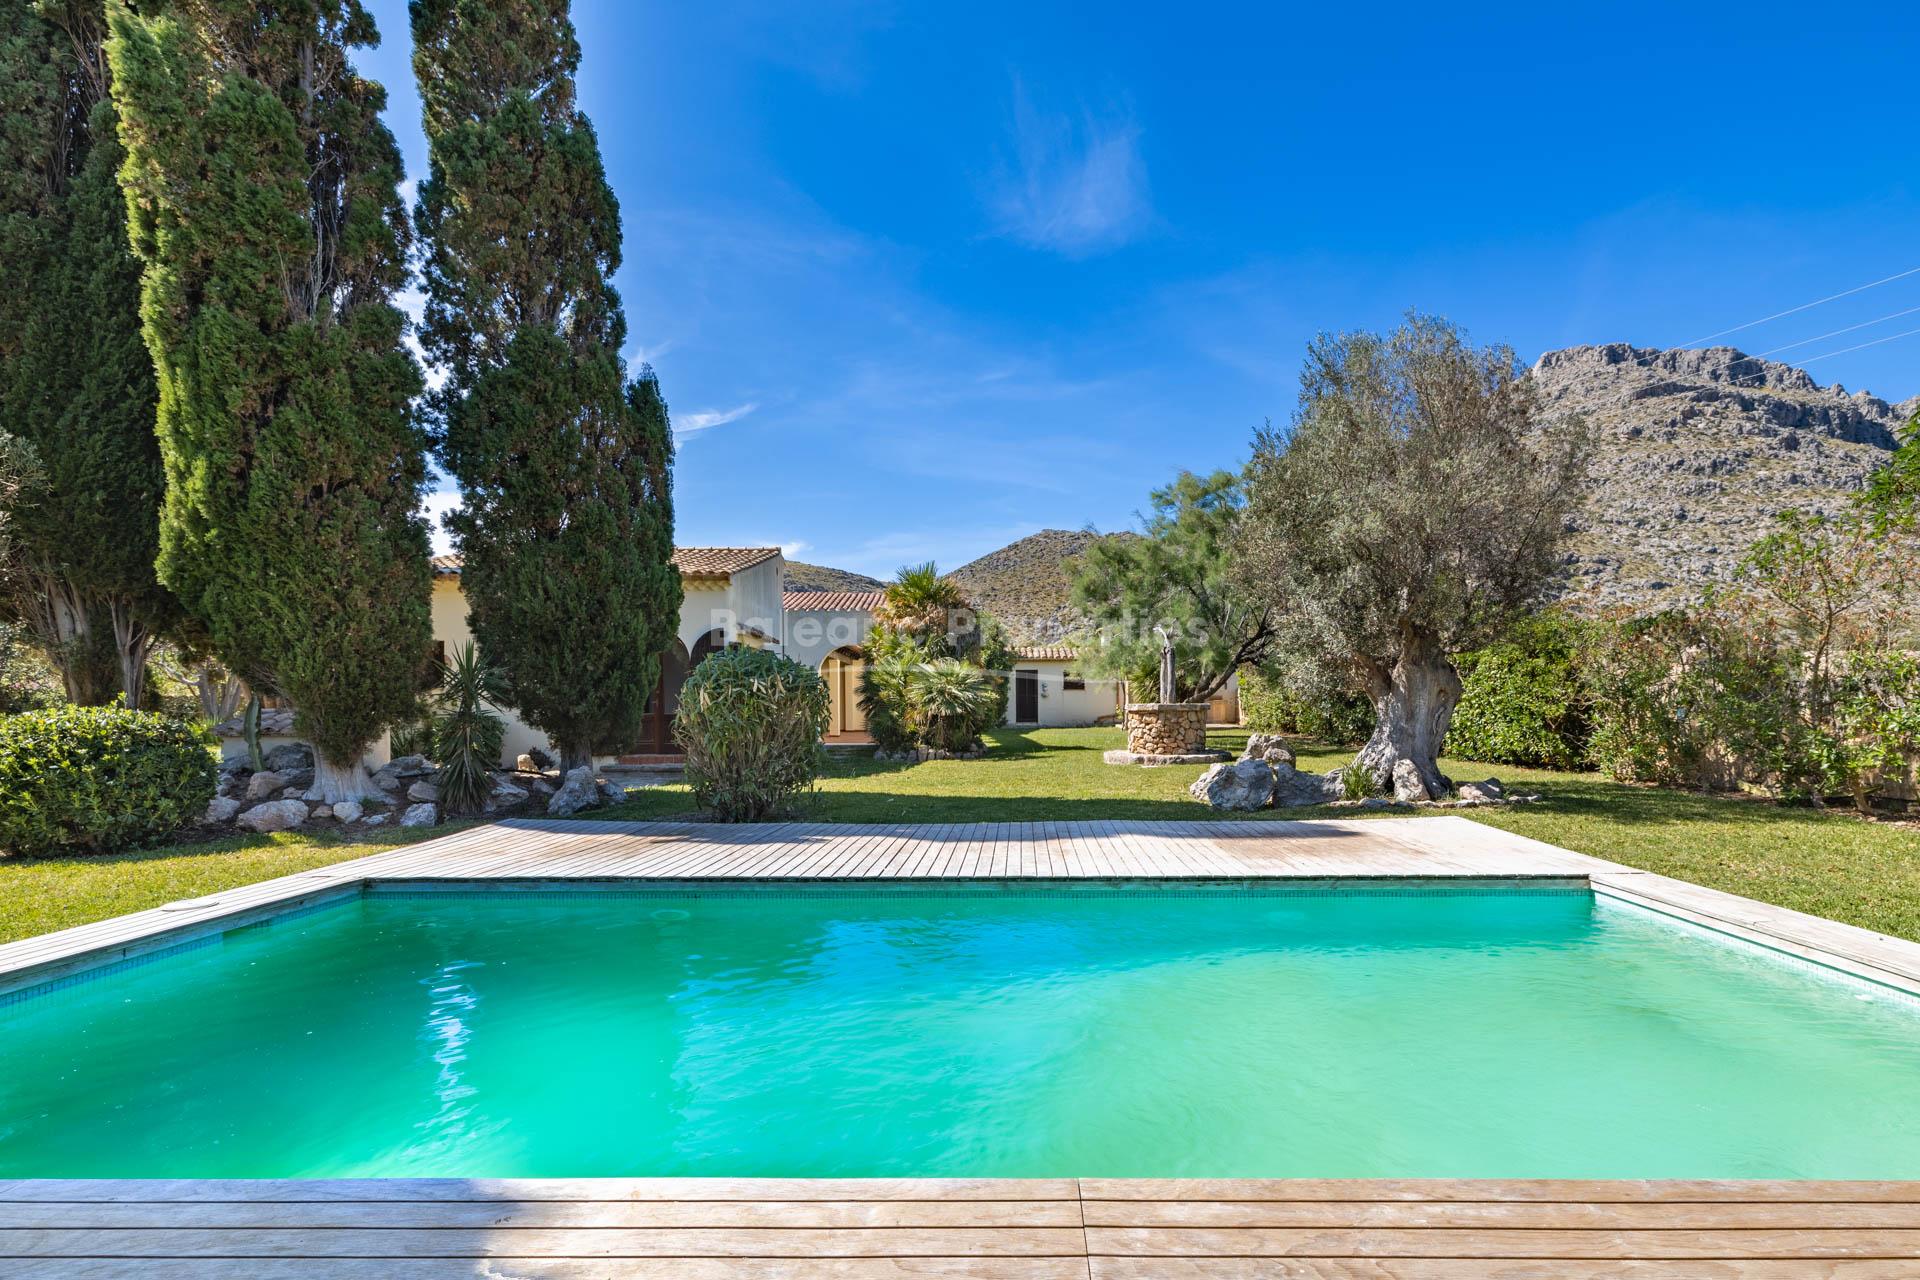 Villa with holiday license for sale in a quiet area of Puerto Pollensa, Mallorca